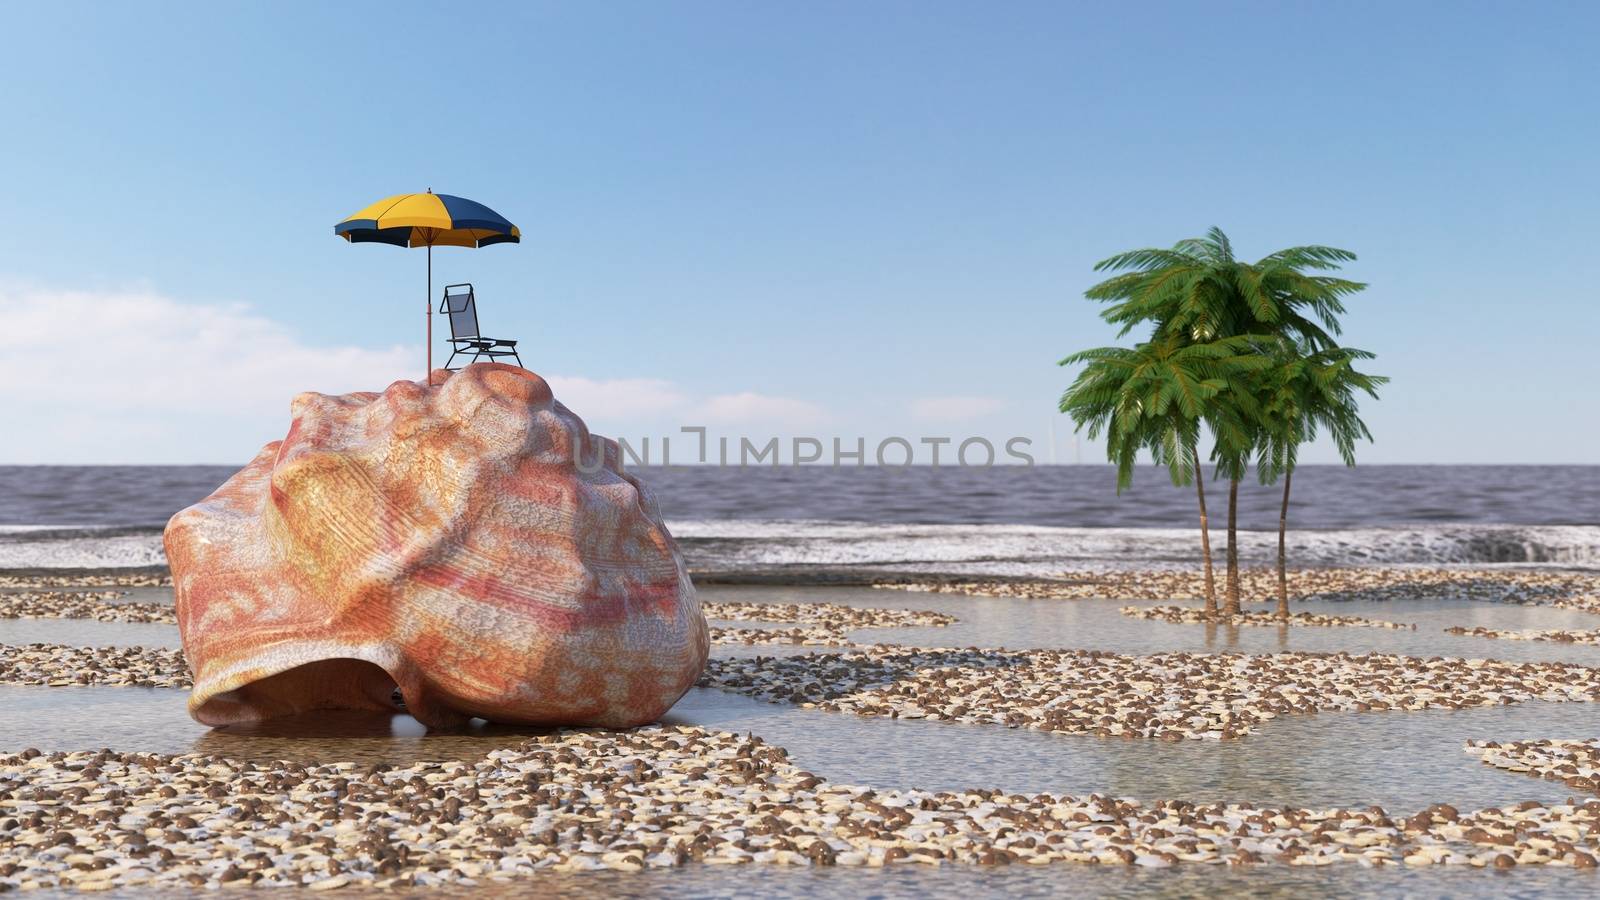 relaxing vacation concept background with seashell,umbrella and beach accessories
3d illustration